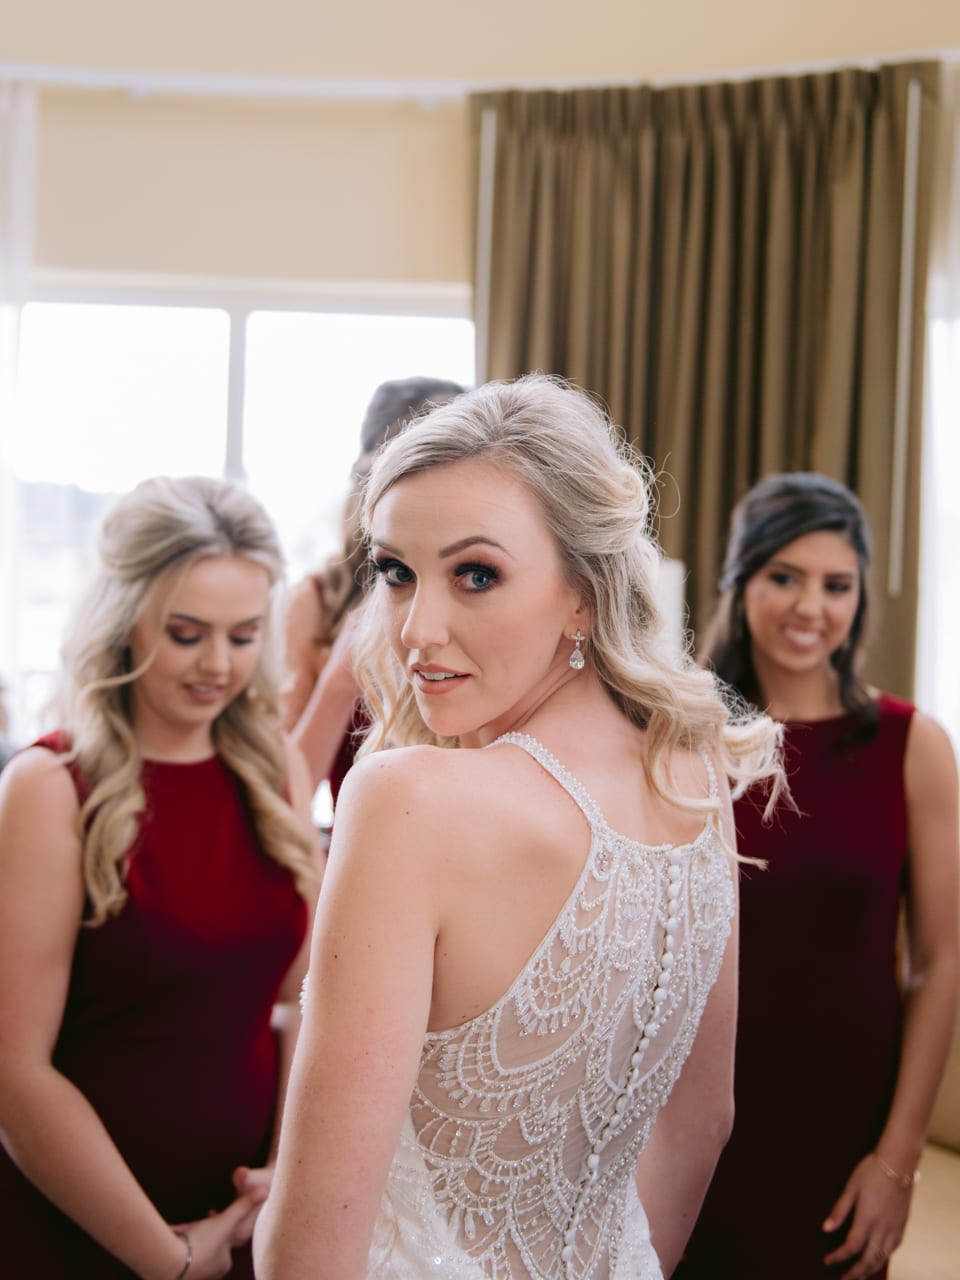 South Carolina Wedding at The Dunes Golf and Beach Club in Myrtle Beach by Pasha Belman Photographer